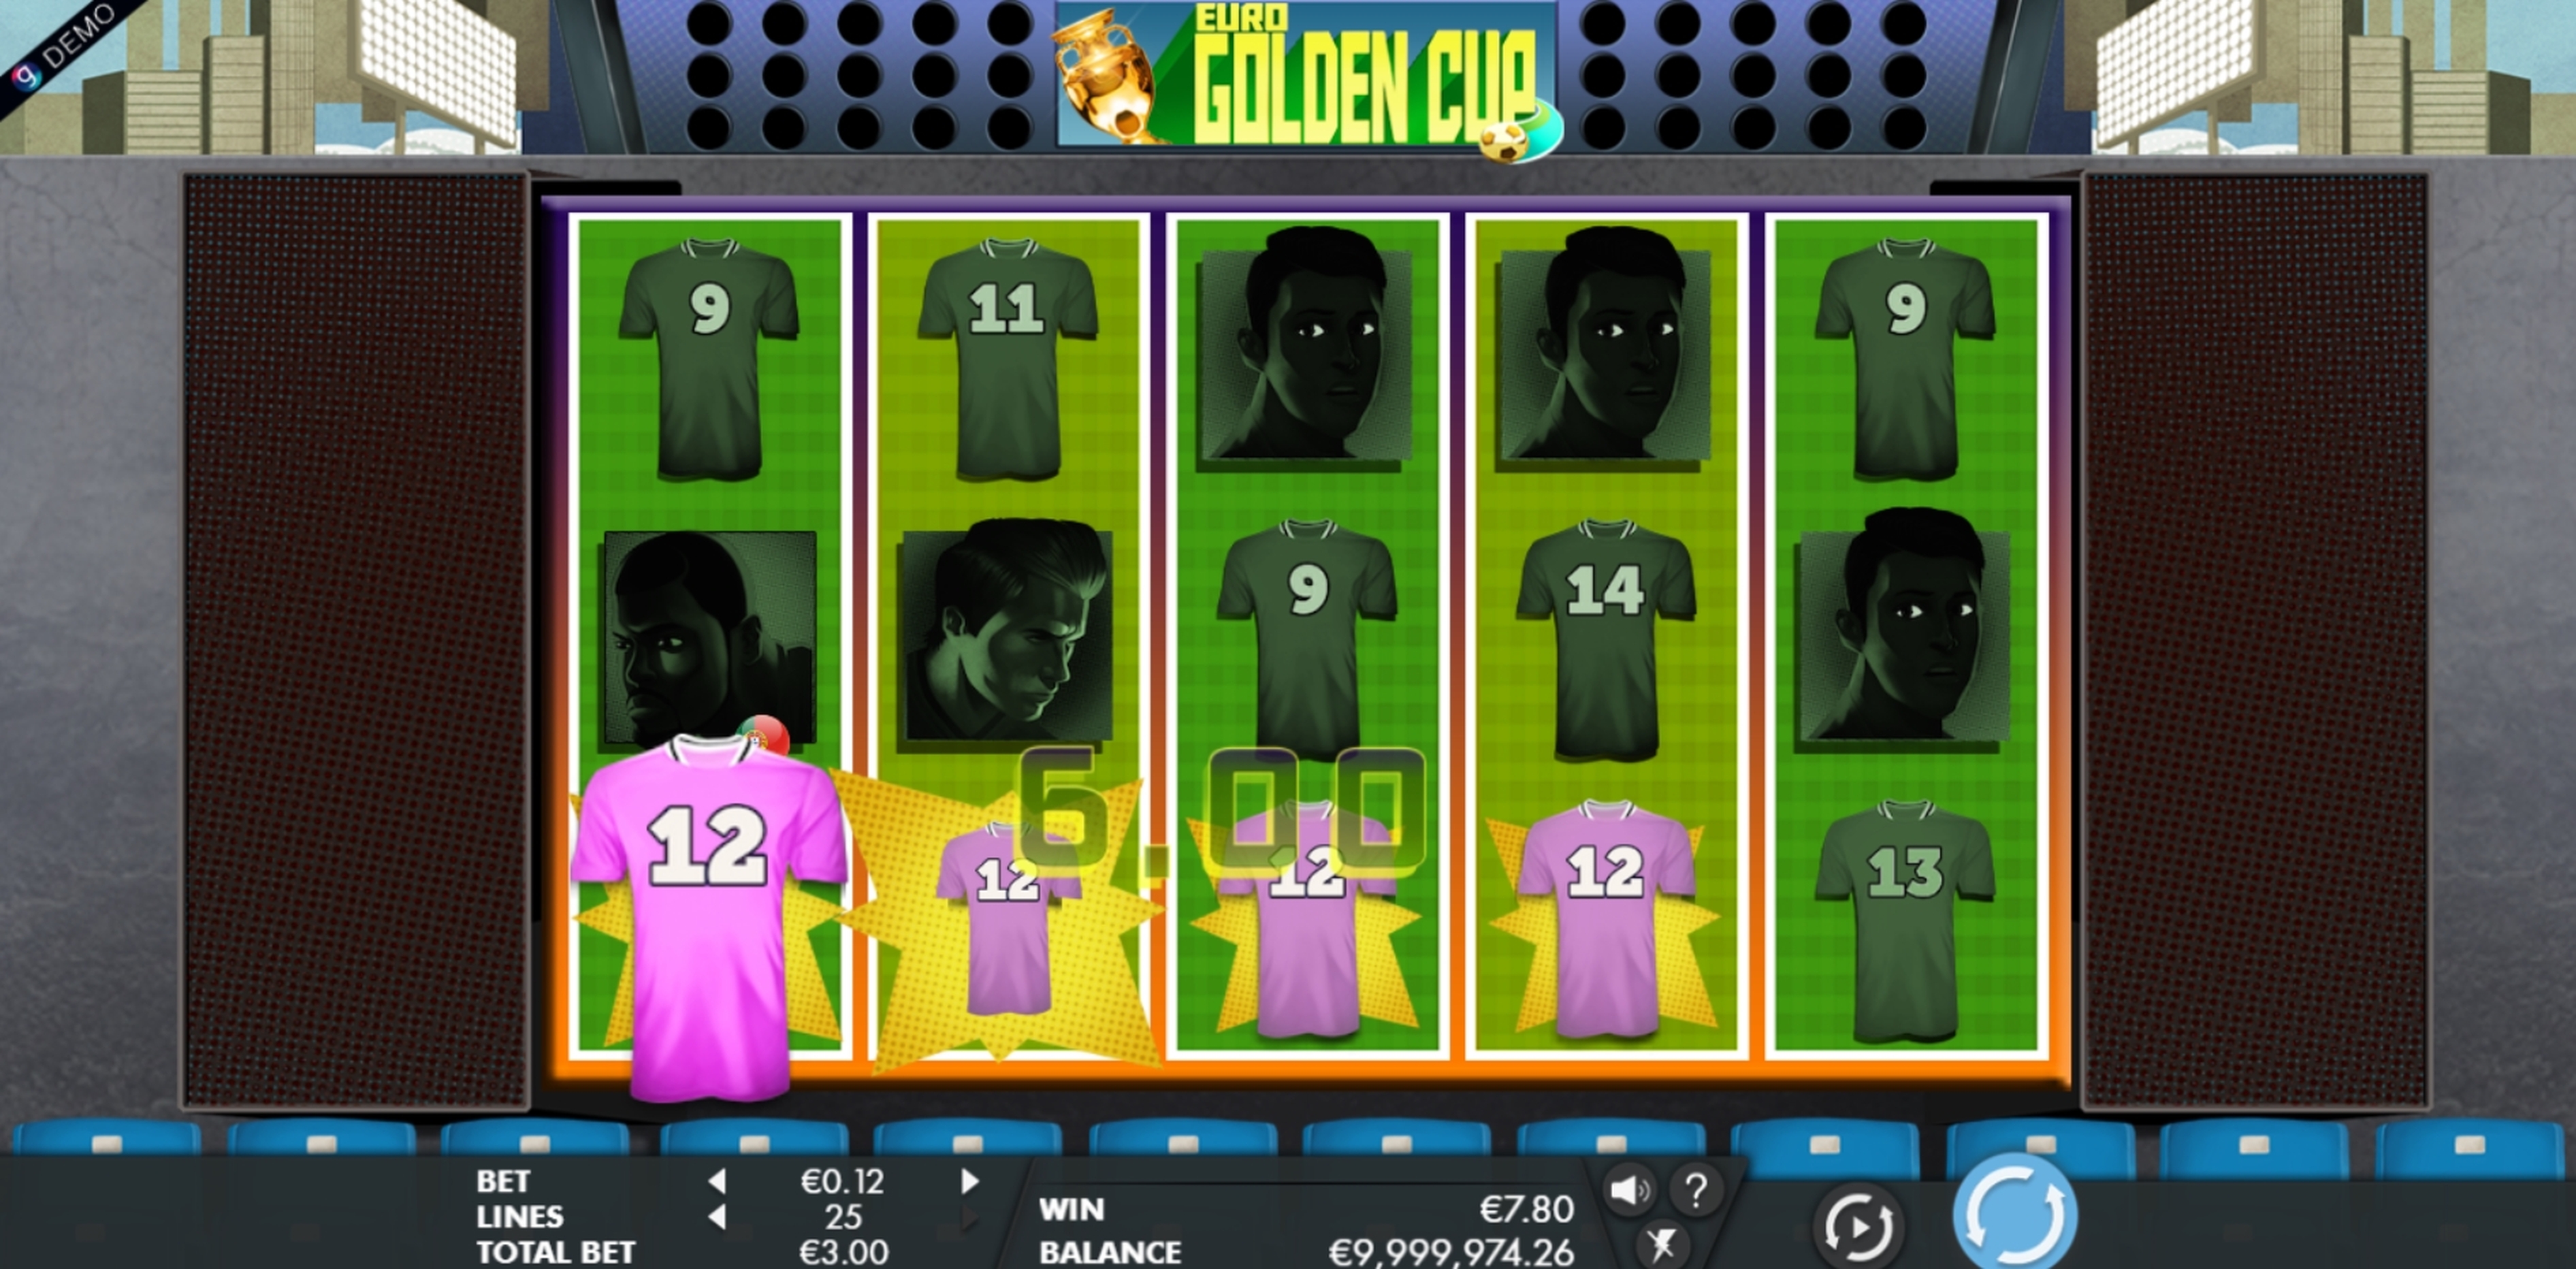 Win Money in Euro Golden Cup Free Slot Game by Genesis Gaming